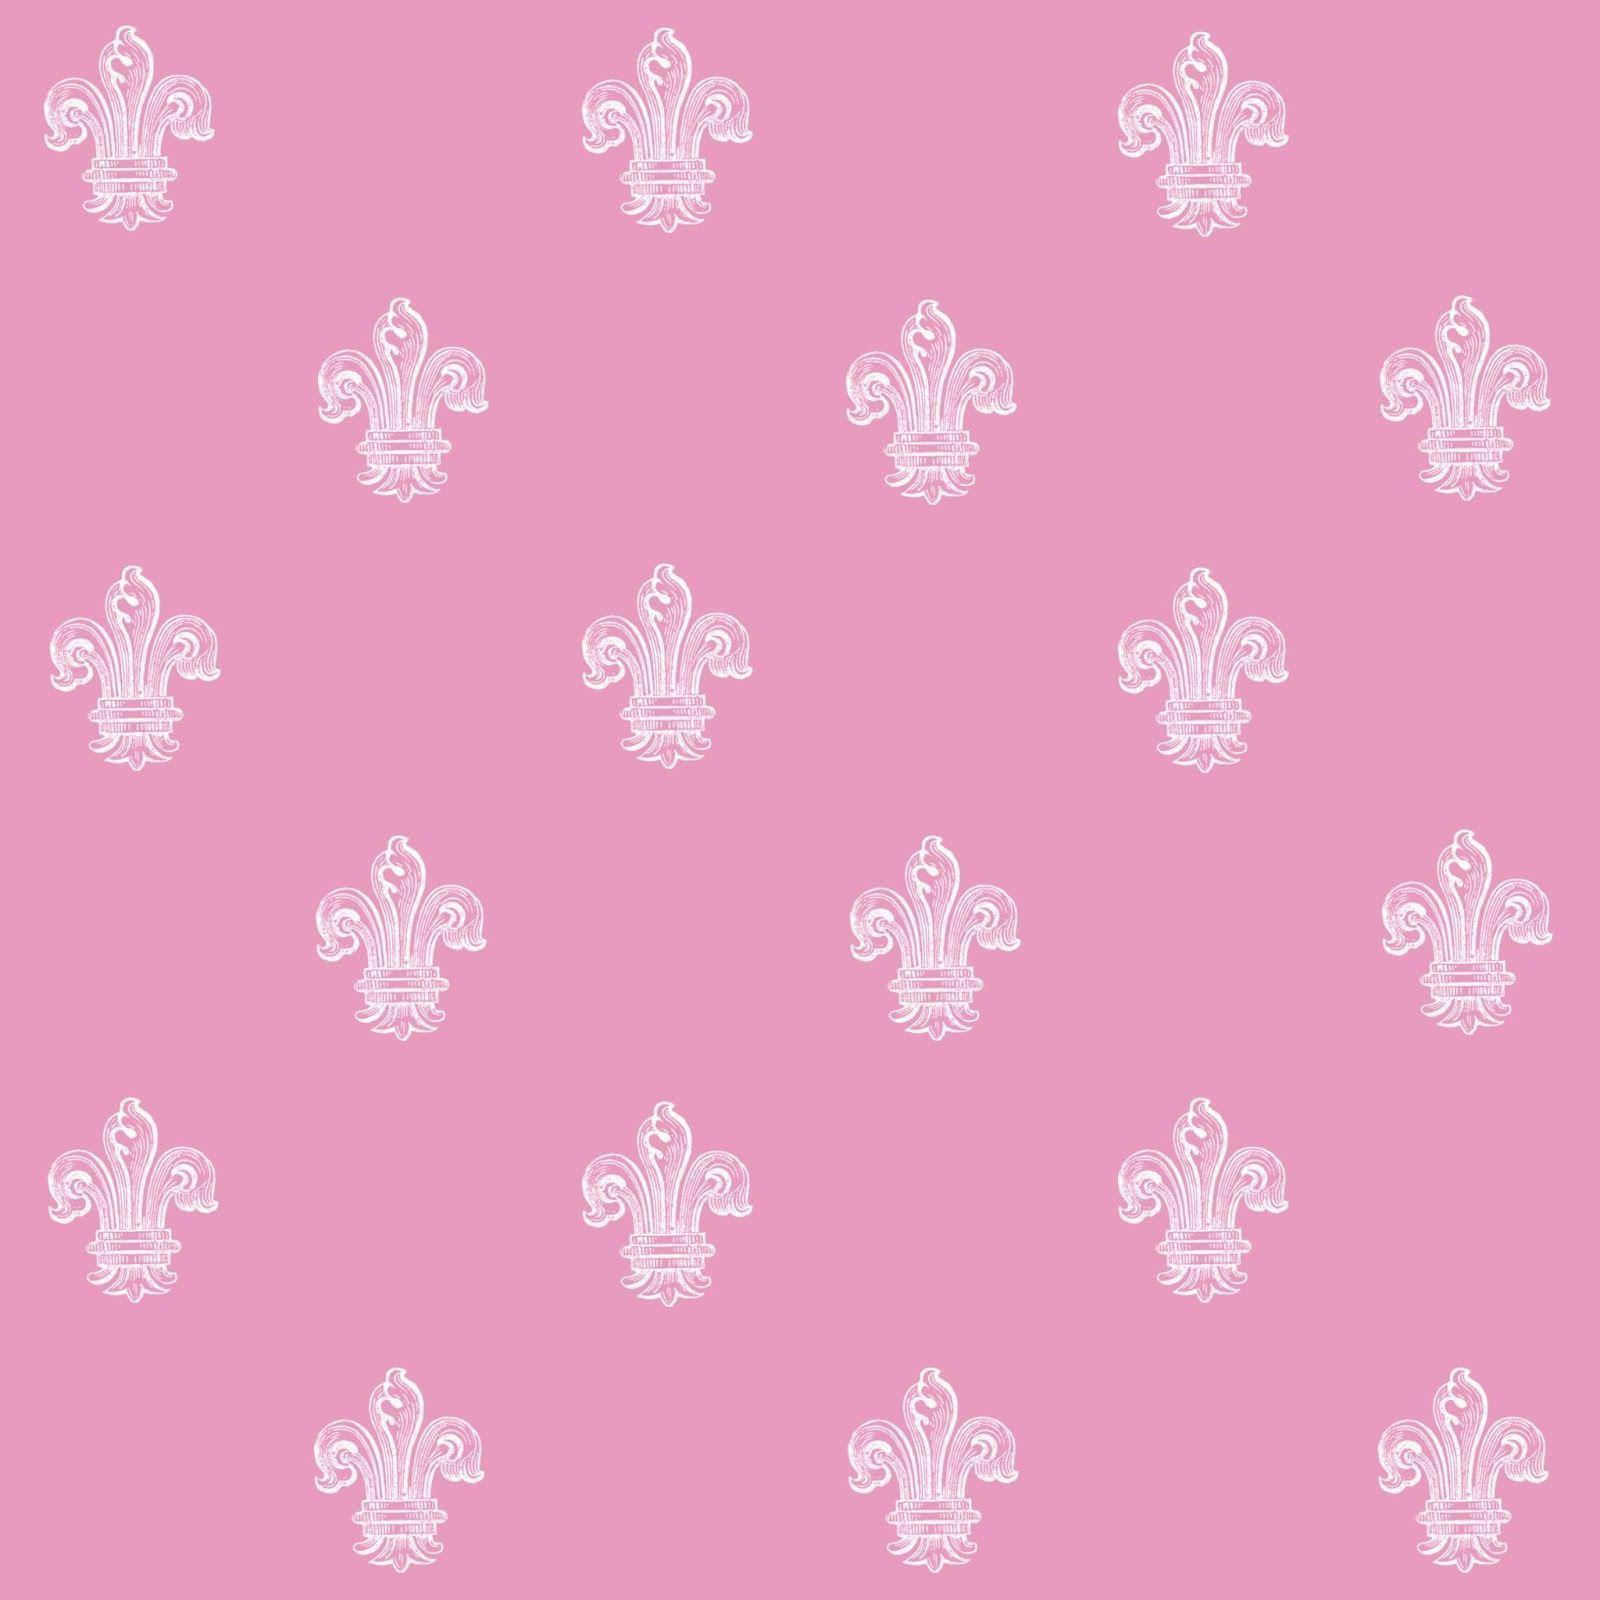 Pink Backgrounds Image - Wallpaper Cave